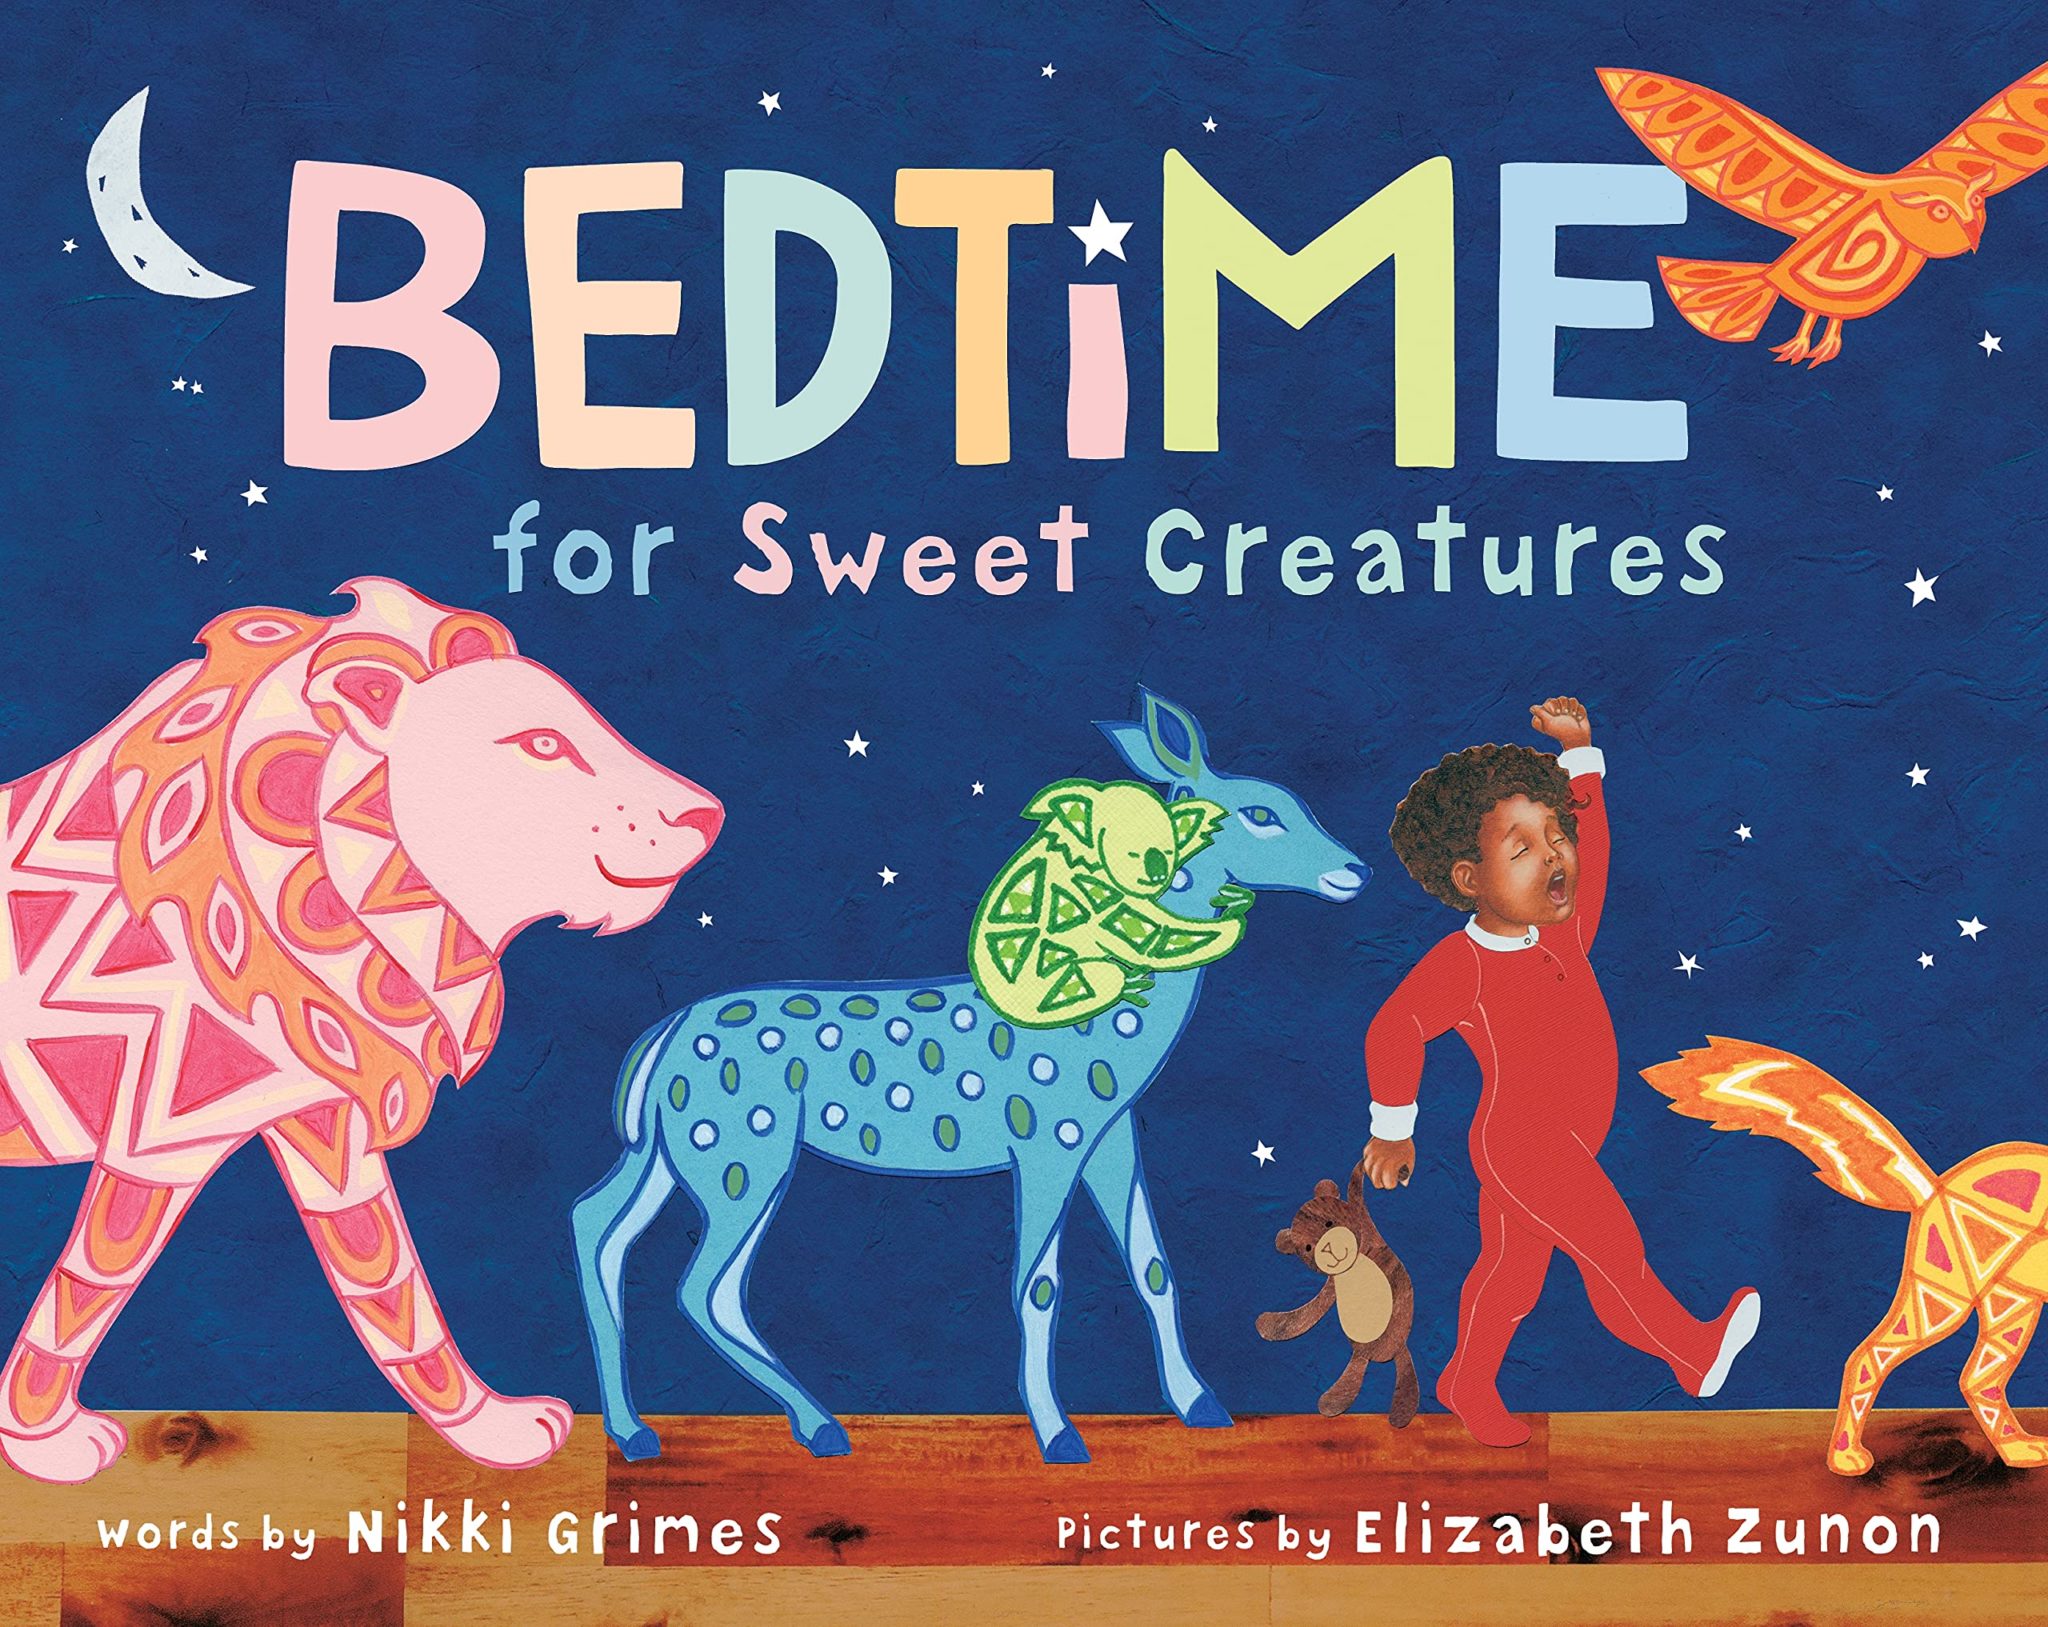 The cover of the picture book "Bedtime for Sweet Creatures" features a sleepy child in red pajamas leading a parade of wild animals.